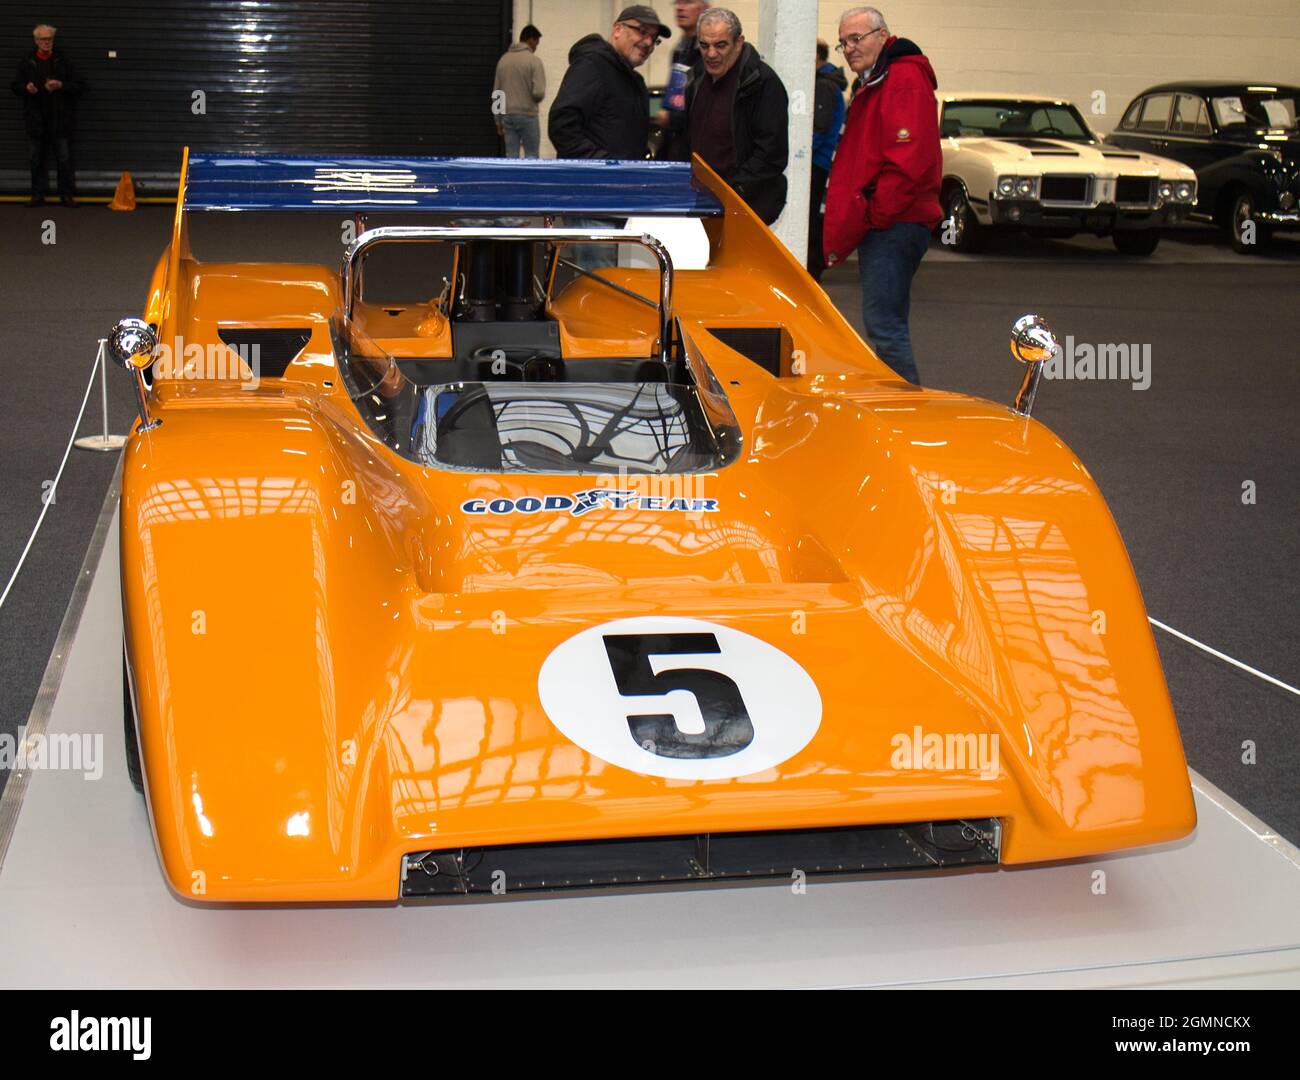 Denny Hulme's McLaren Can Am NME V8 at the London Classic Car Show, Earls Court, 2020 in a display honouring the late Bruce McLaren on the 50th Stock Photo